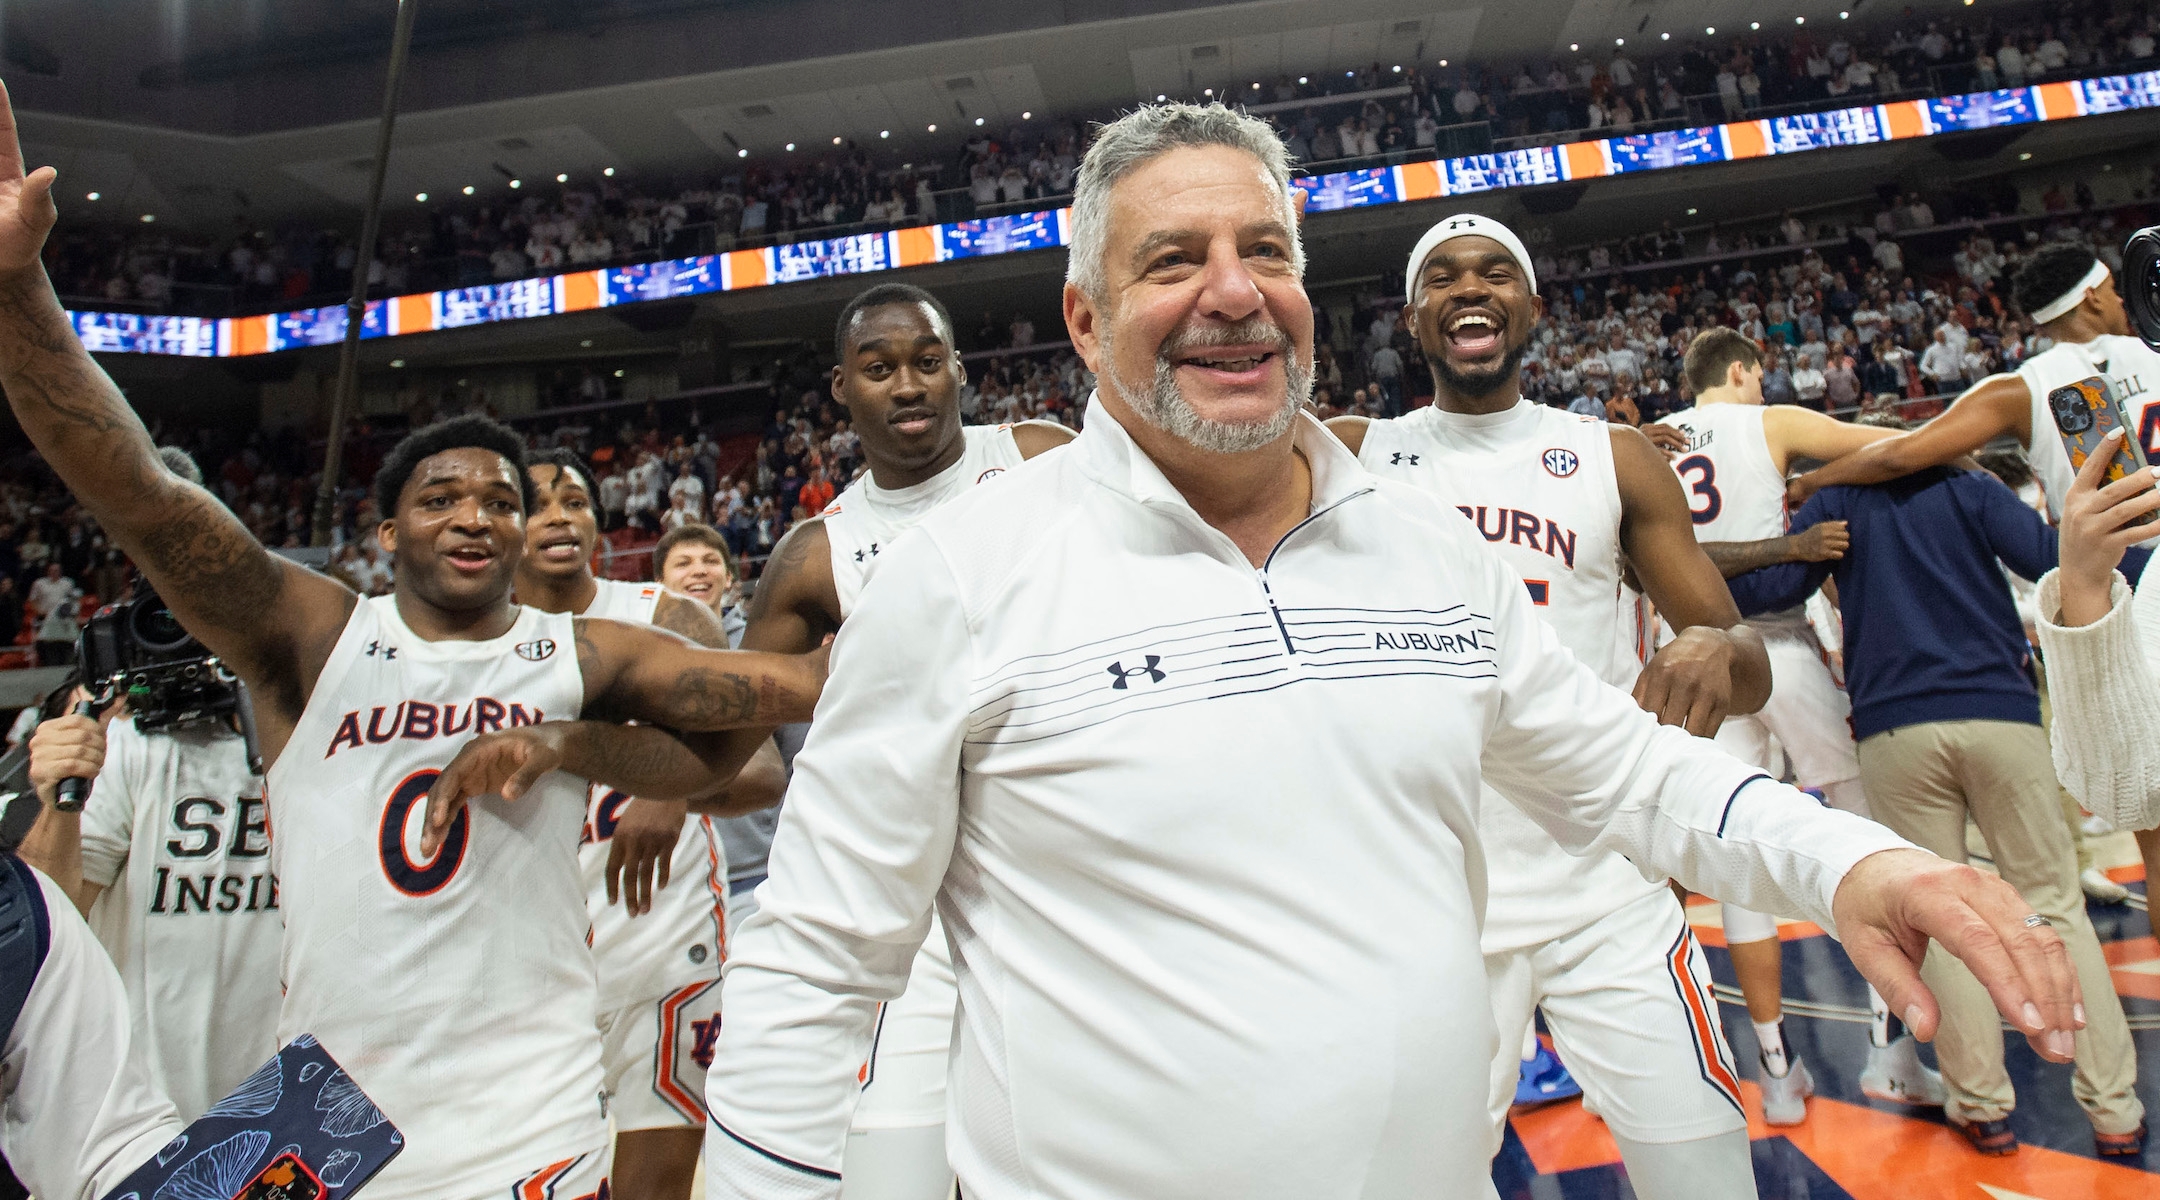 Bruce Pearl celebrates with his team after defeating the Alabama Crimson Tide at Auburn Arena, Feb. 1, 2022. (Michael Chang/Getty Images)